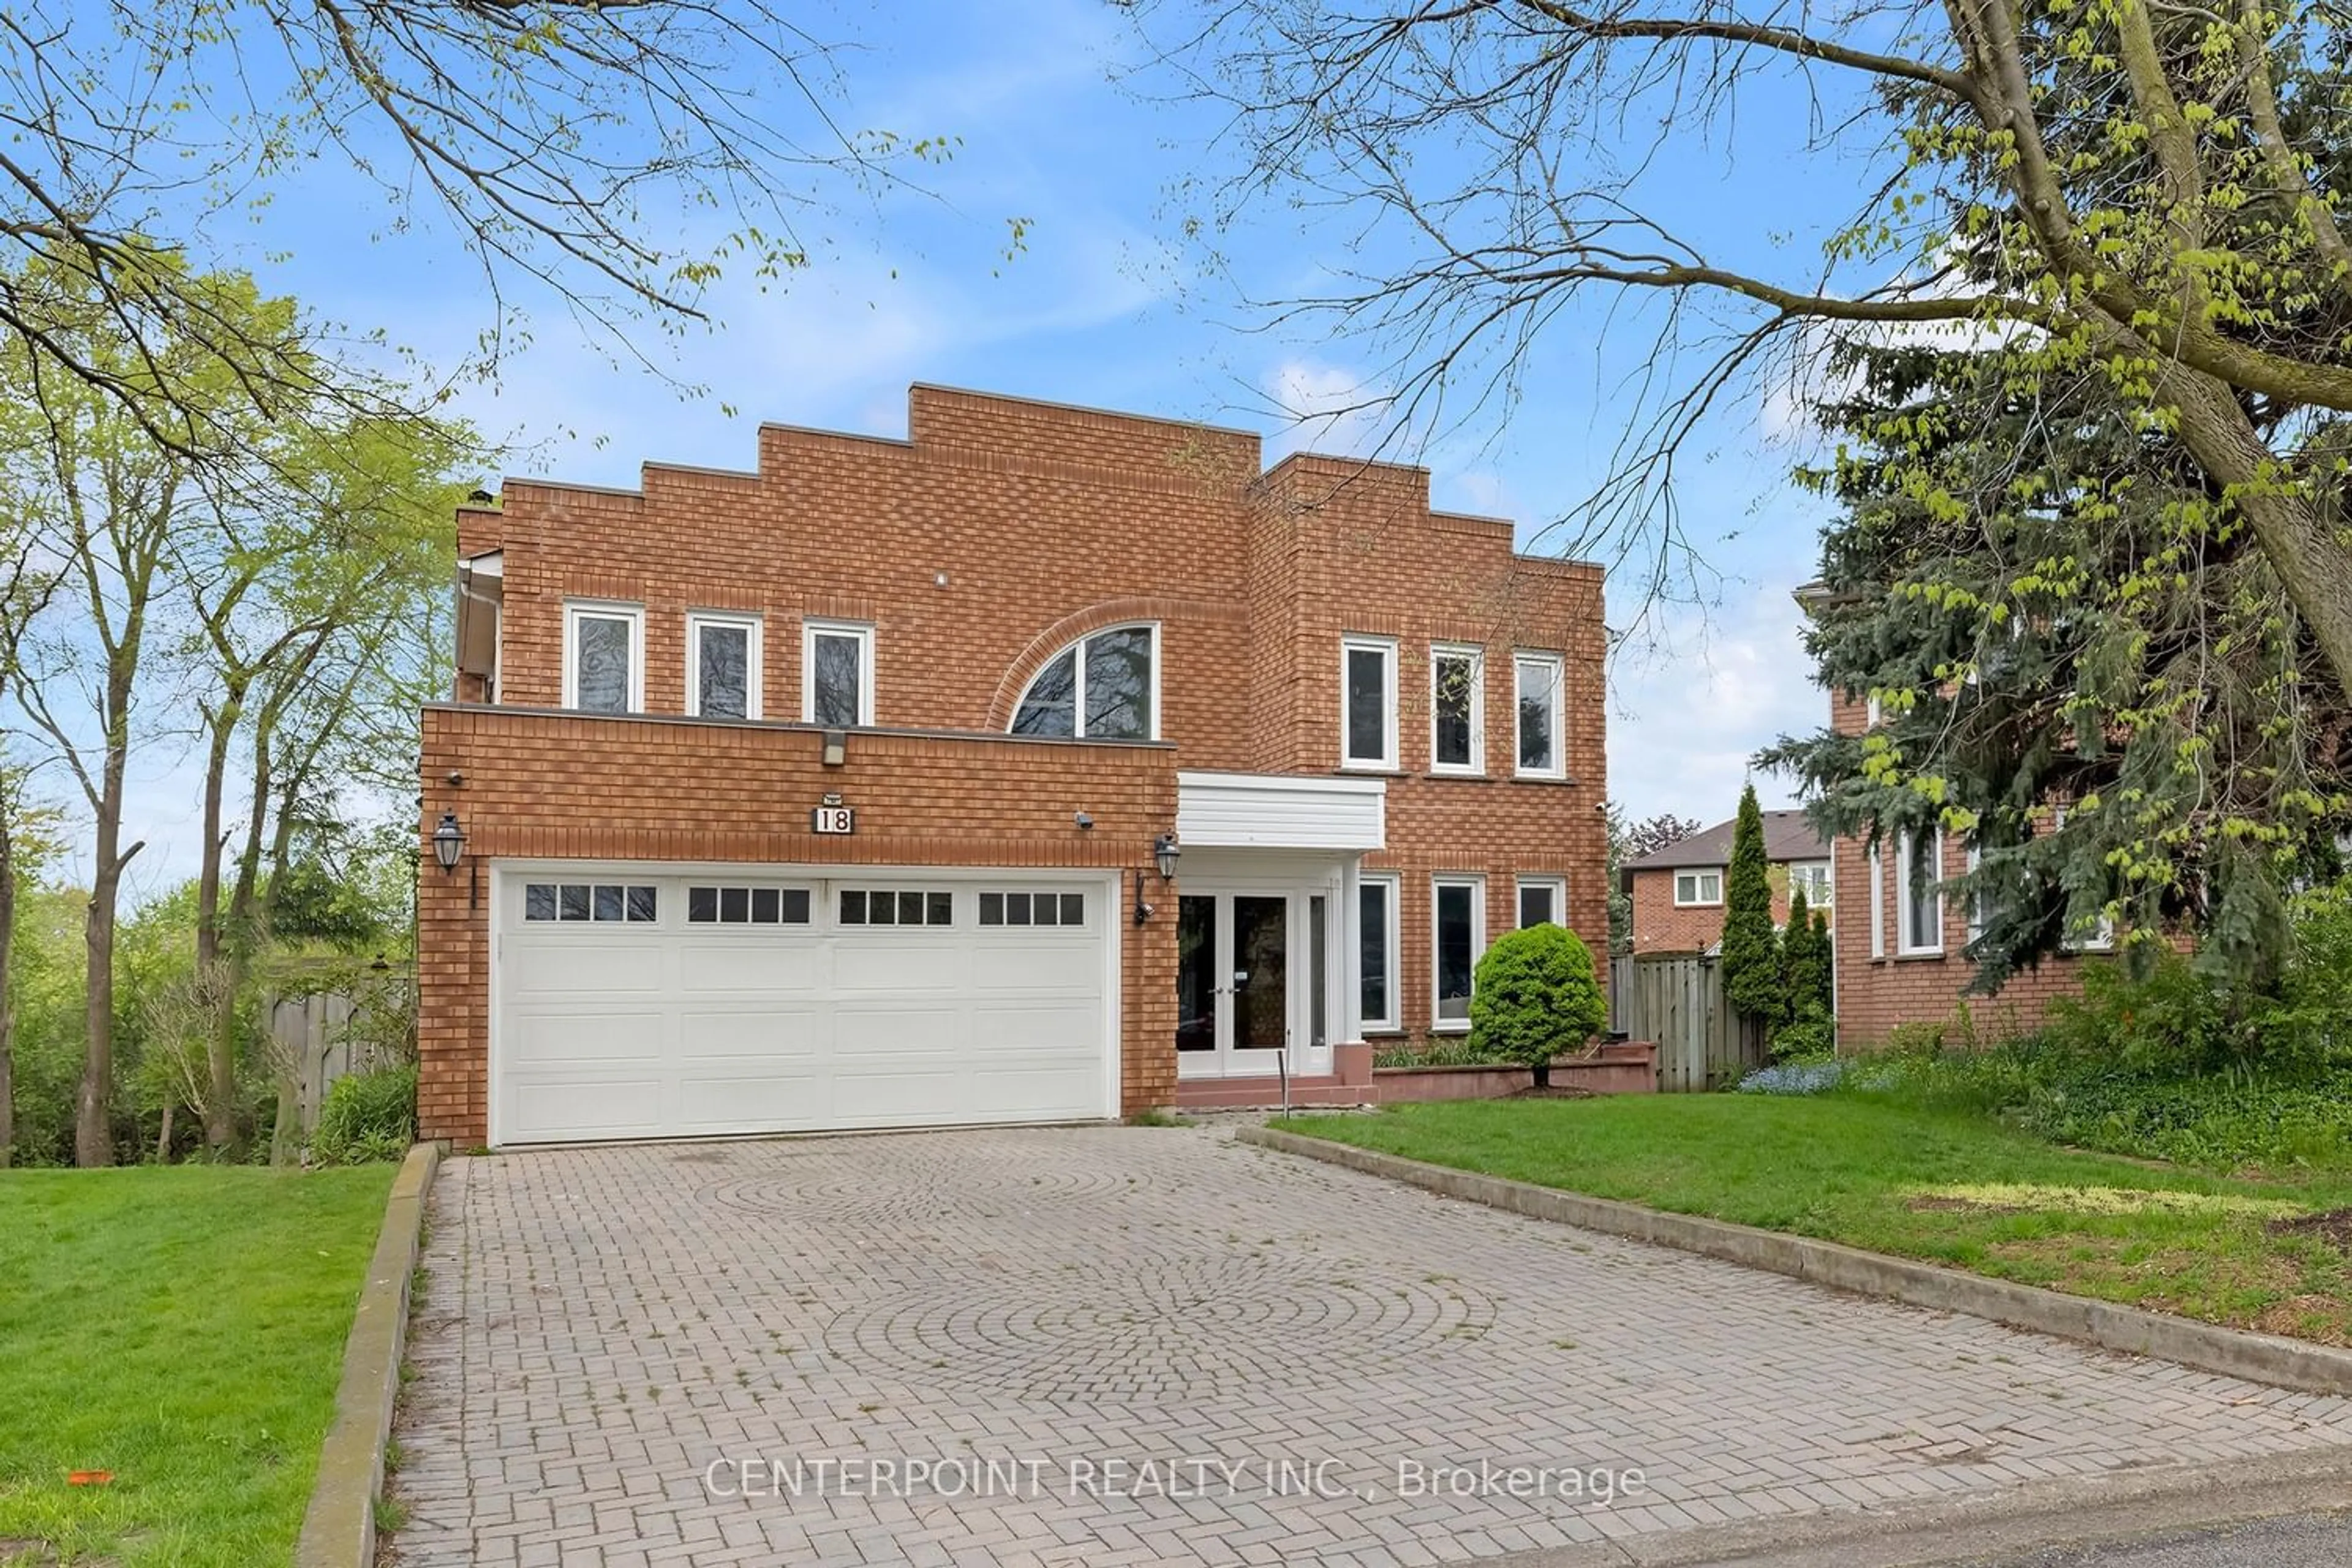 Home with brick exterior material for 18 Trinity Cres, Richmond Hill Ontario L4B 2S3